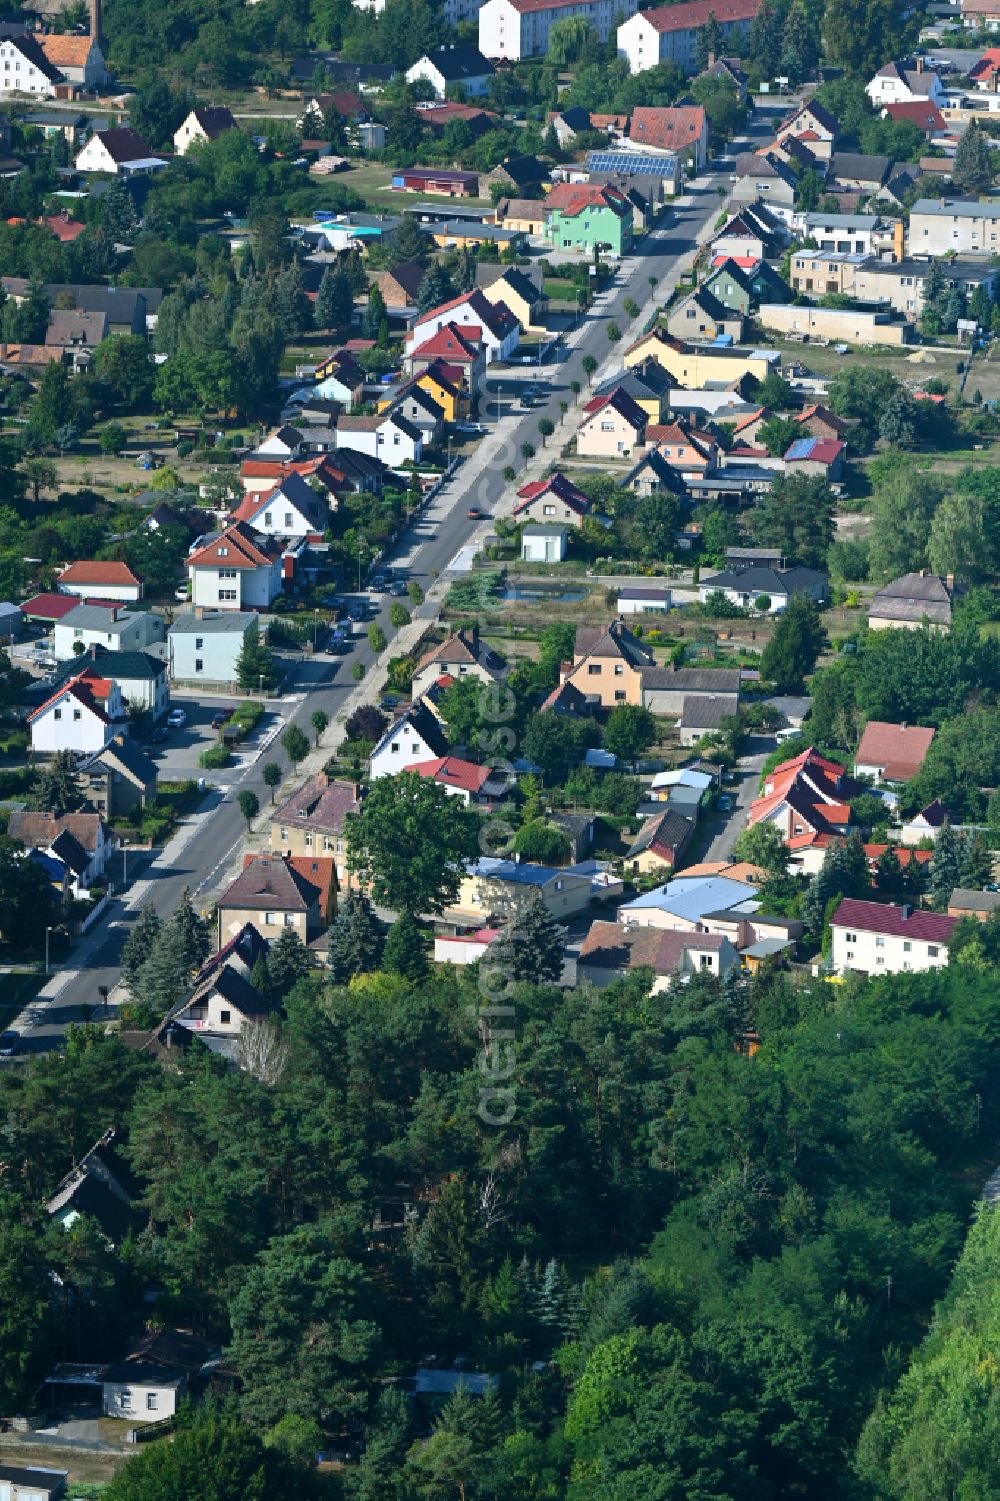 Crinitz from the bird's eye view: Town View of the streets and houses of the residential areas along the main street in Crinitz in the state Brandenburg, Germany